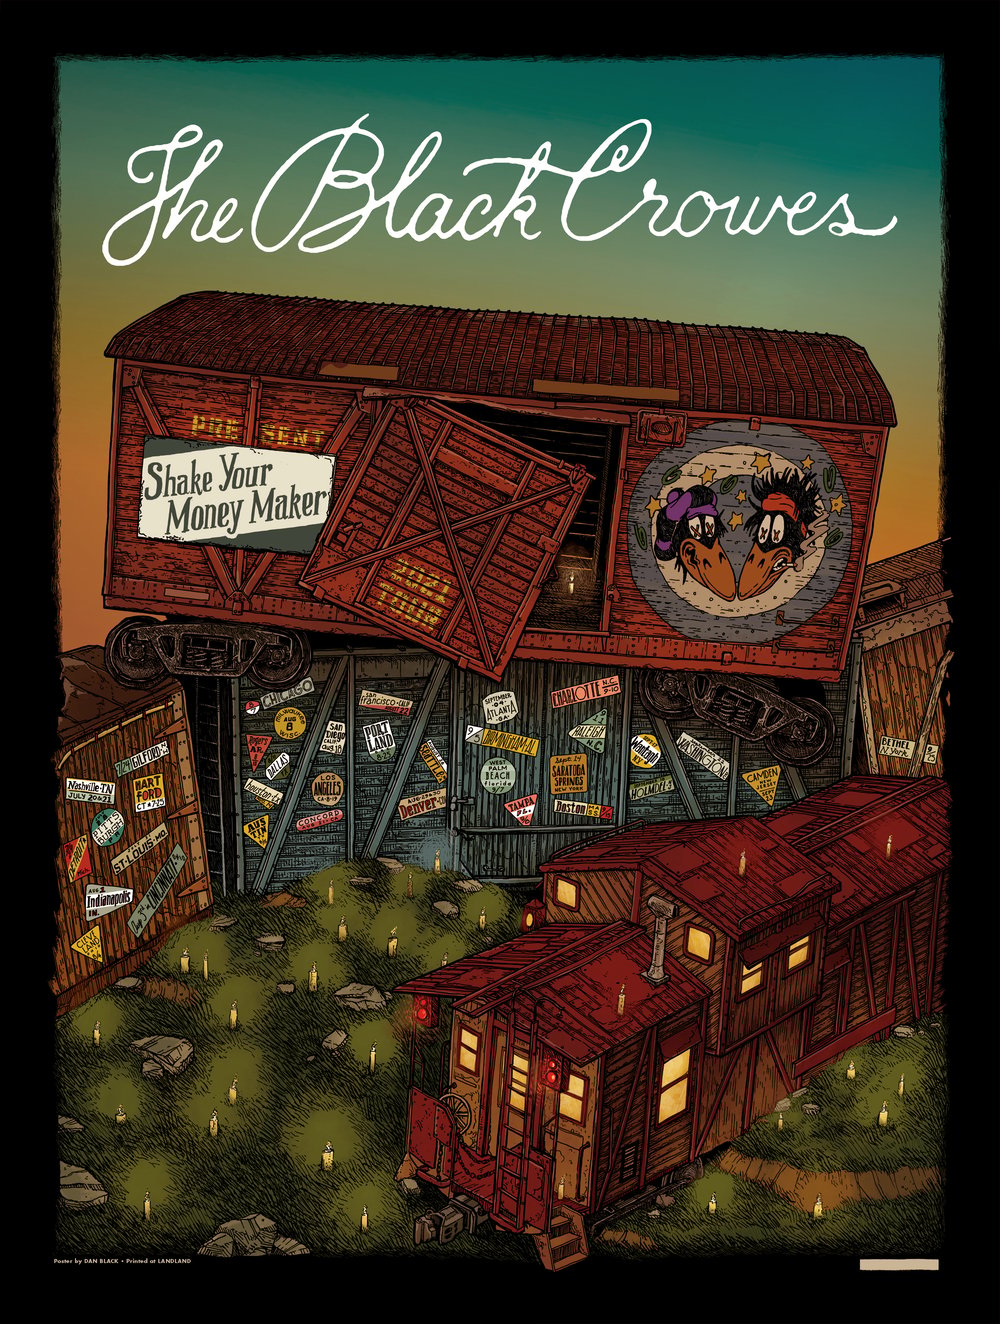 The Black Crowes ("Shake Your Money Maker" 2021 Tour) • L.E. Official Poster (18" x 24")